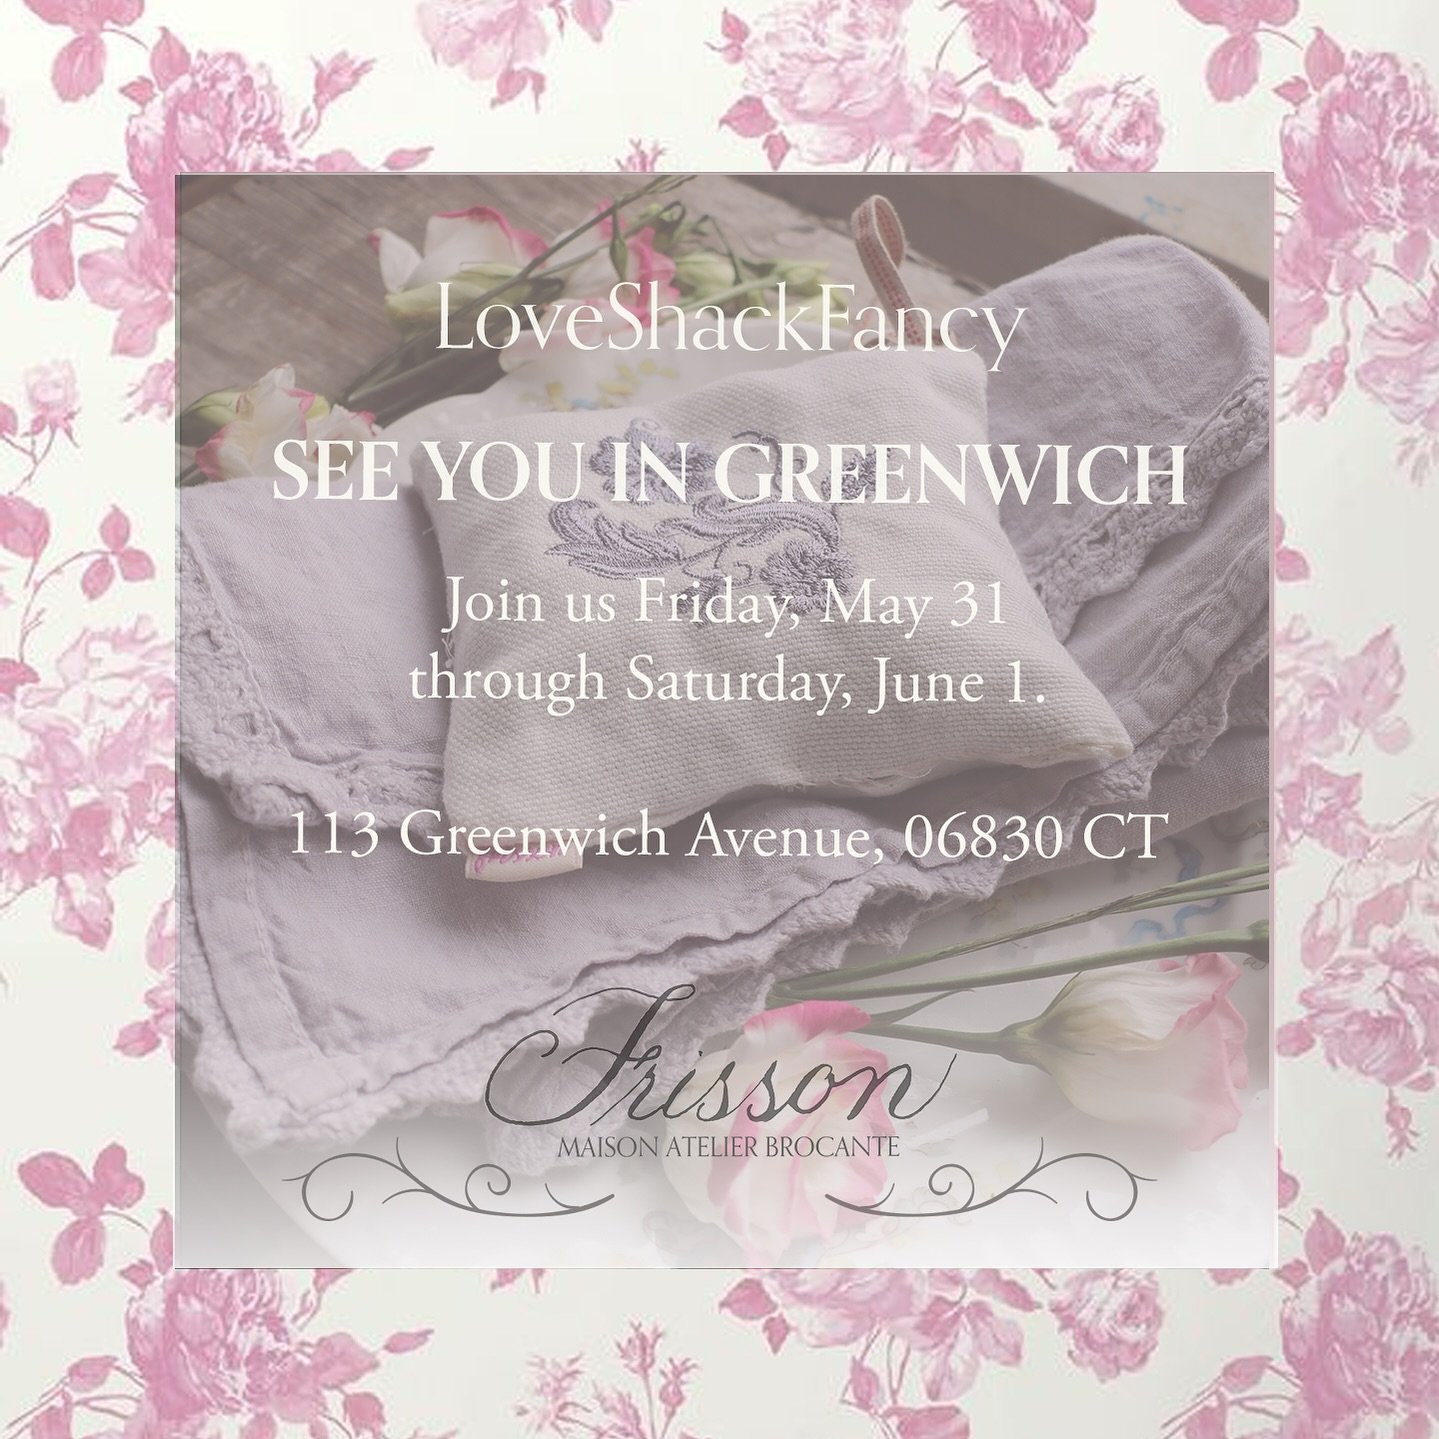 { LoveShackFancy Trunkshows } with Frisson Maison. We can&rsquo;t wait for our upcoming in-store happenings with our friends @loveshackfancy. Please save the date and join us next in Greenwich: 113 GREENWICH AVENUE, 06830 CT. 🎀

upcoming shows:
Gree